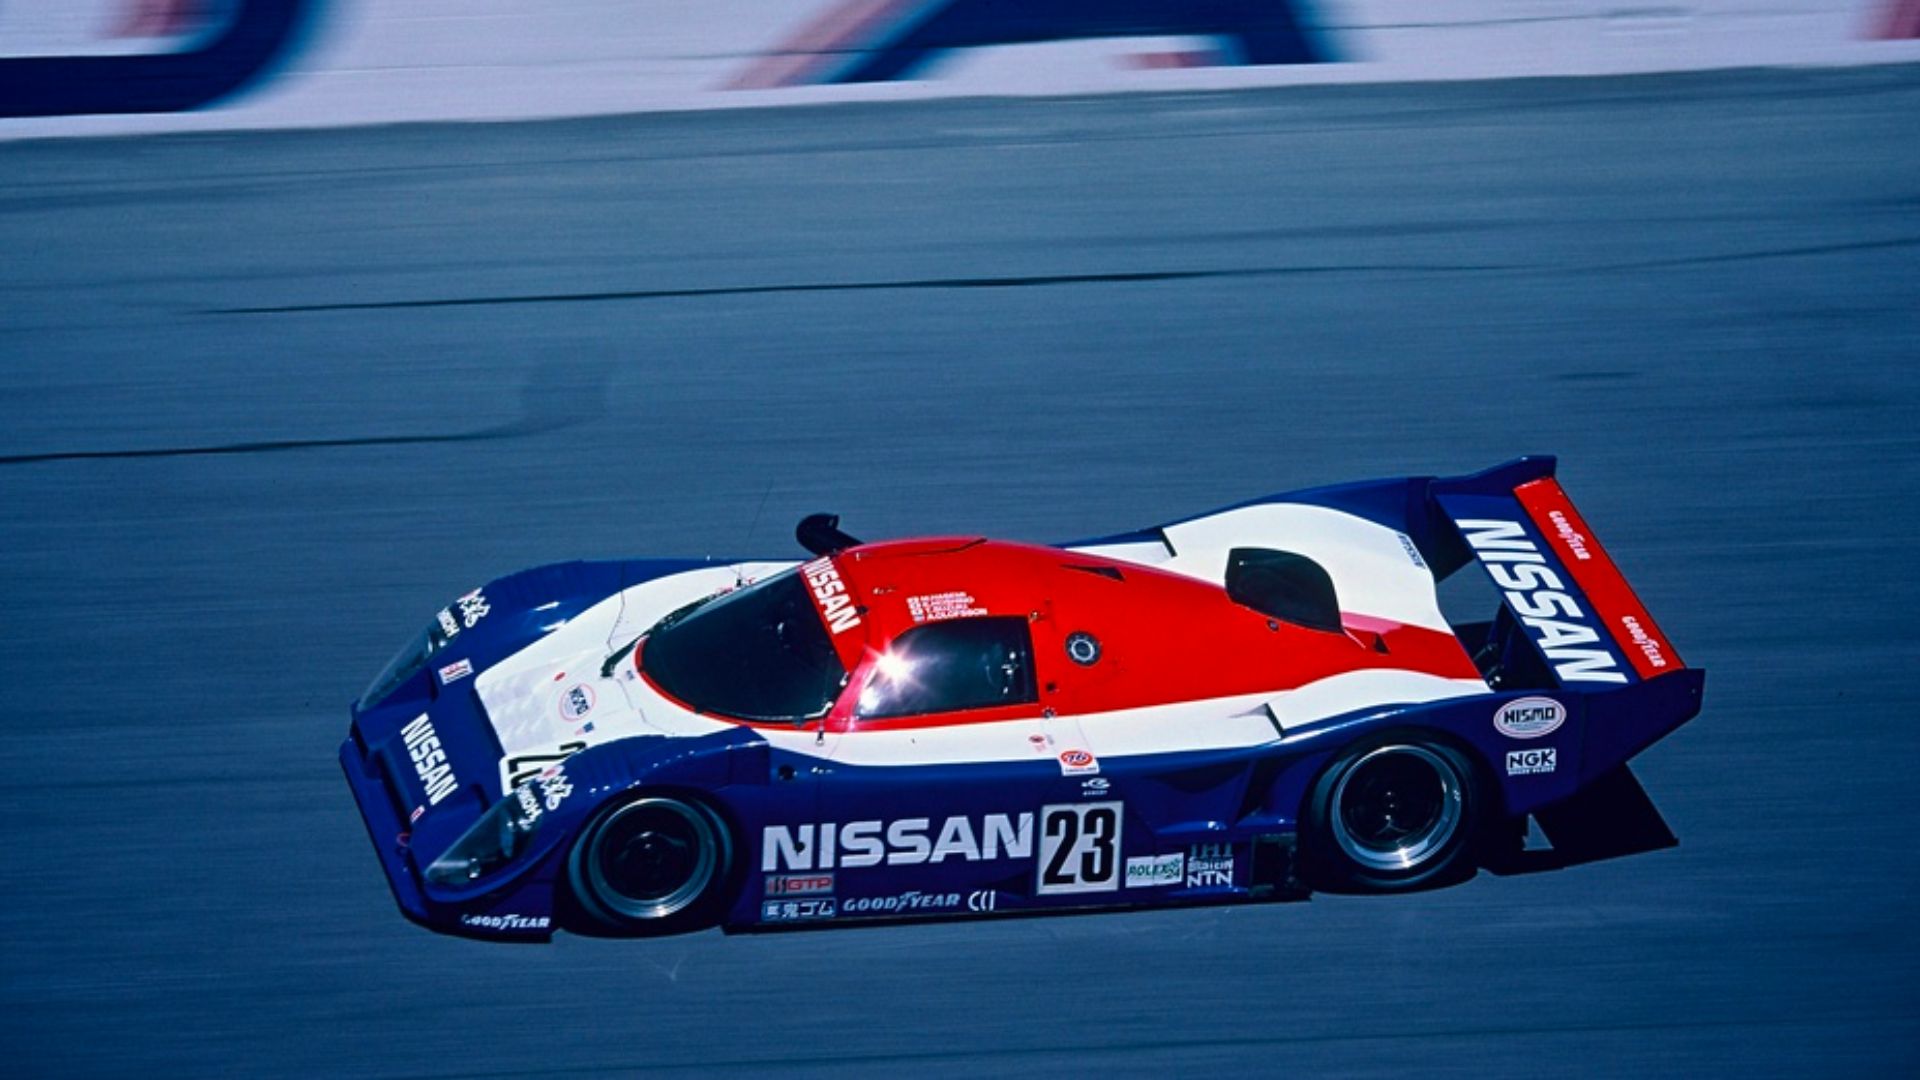 Nissan number 23 on race car